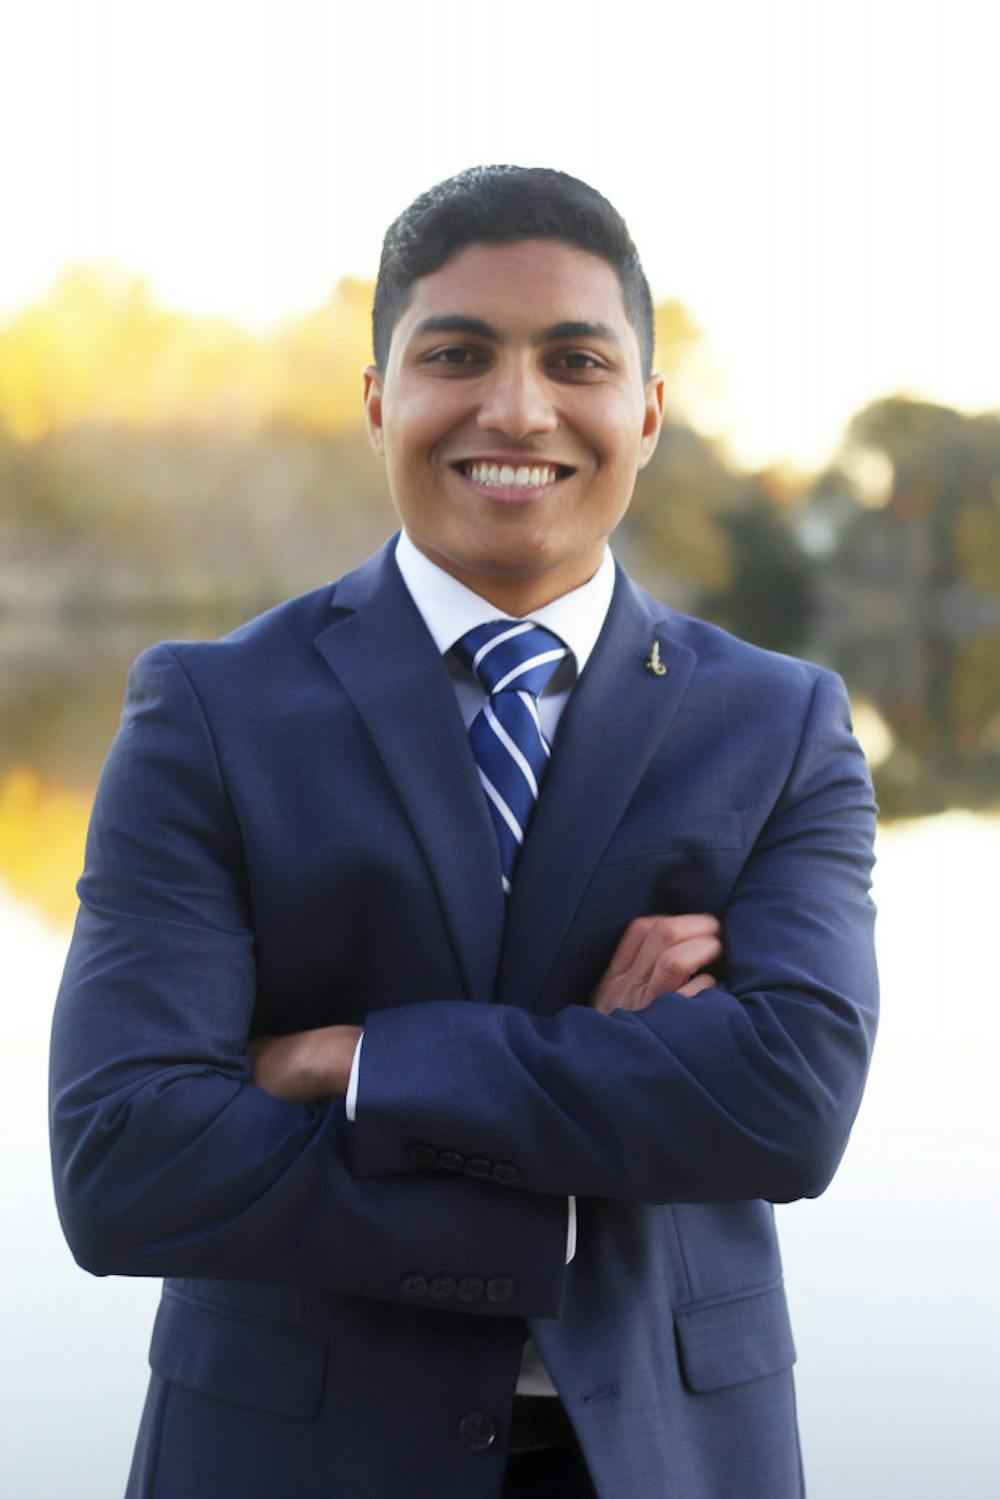 <p>Hammaad Saber is a 22-year-old UF industrial and systems engineering senior running for Student Body vice president with Access Party.</p><p>Saber currently serves as a senator for the College of Engineering. He served on the Rules and Ethics Committee, was an Innovation Academy ambassador and has interned as a consultant analyst for The Walt Disney Co. Saber was a First Year Florida peer leader and peer mentor, and he is also the networking director of the Institute of Industrial Engineers. He also founded, and is the president of, IA Leadership Enhancement and Development. He said he wants to apply past experiences to the vice presidential role.</p><p>“I will do everything I can to make sure that the students’ voice are heard, and if a student has a concern, if a student wants an event, I want to make sure that’s reality,” he said. “I have a huge skill set and I’m itching to use it.”</p>